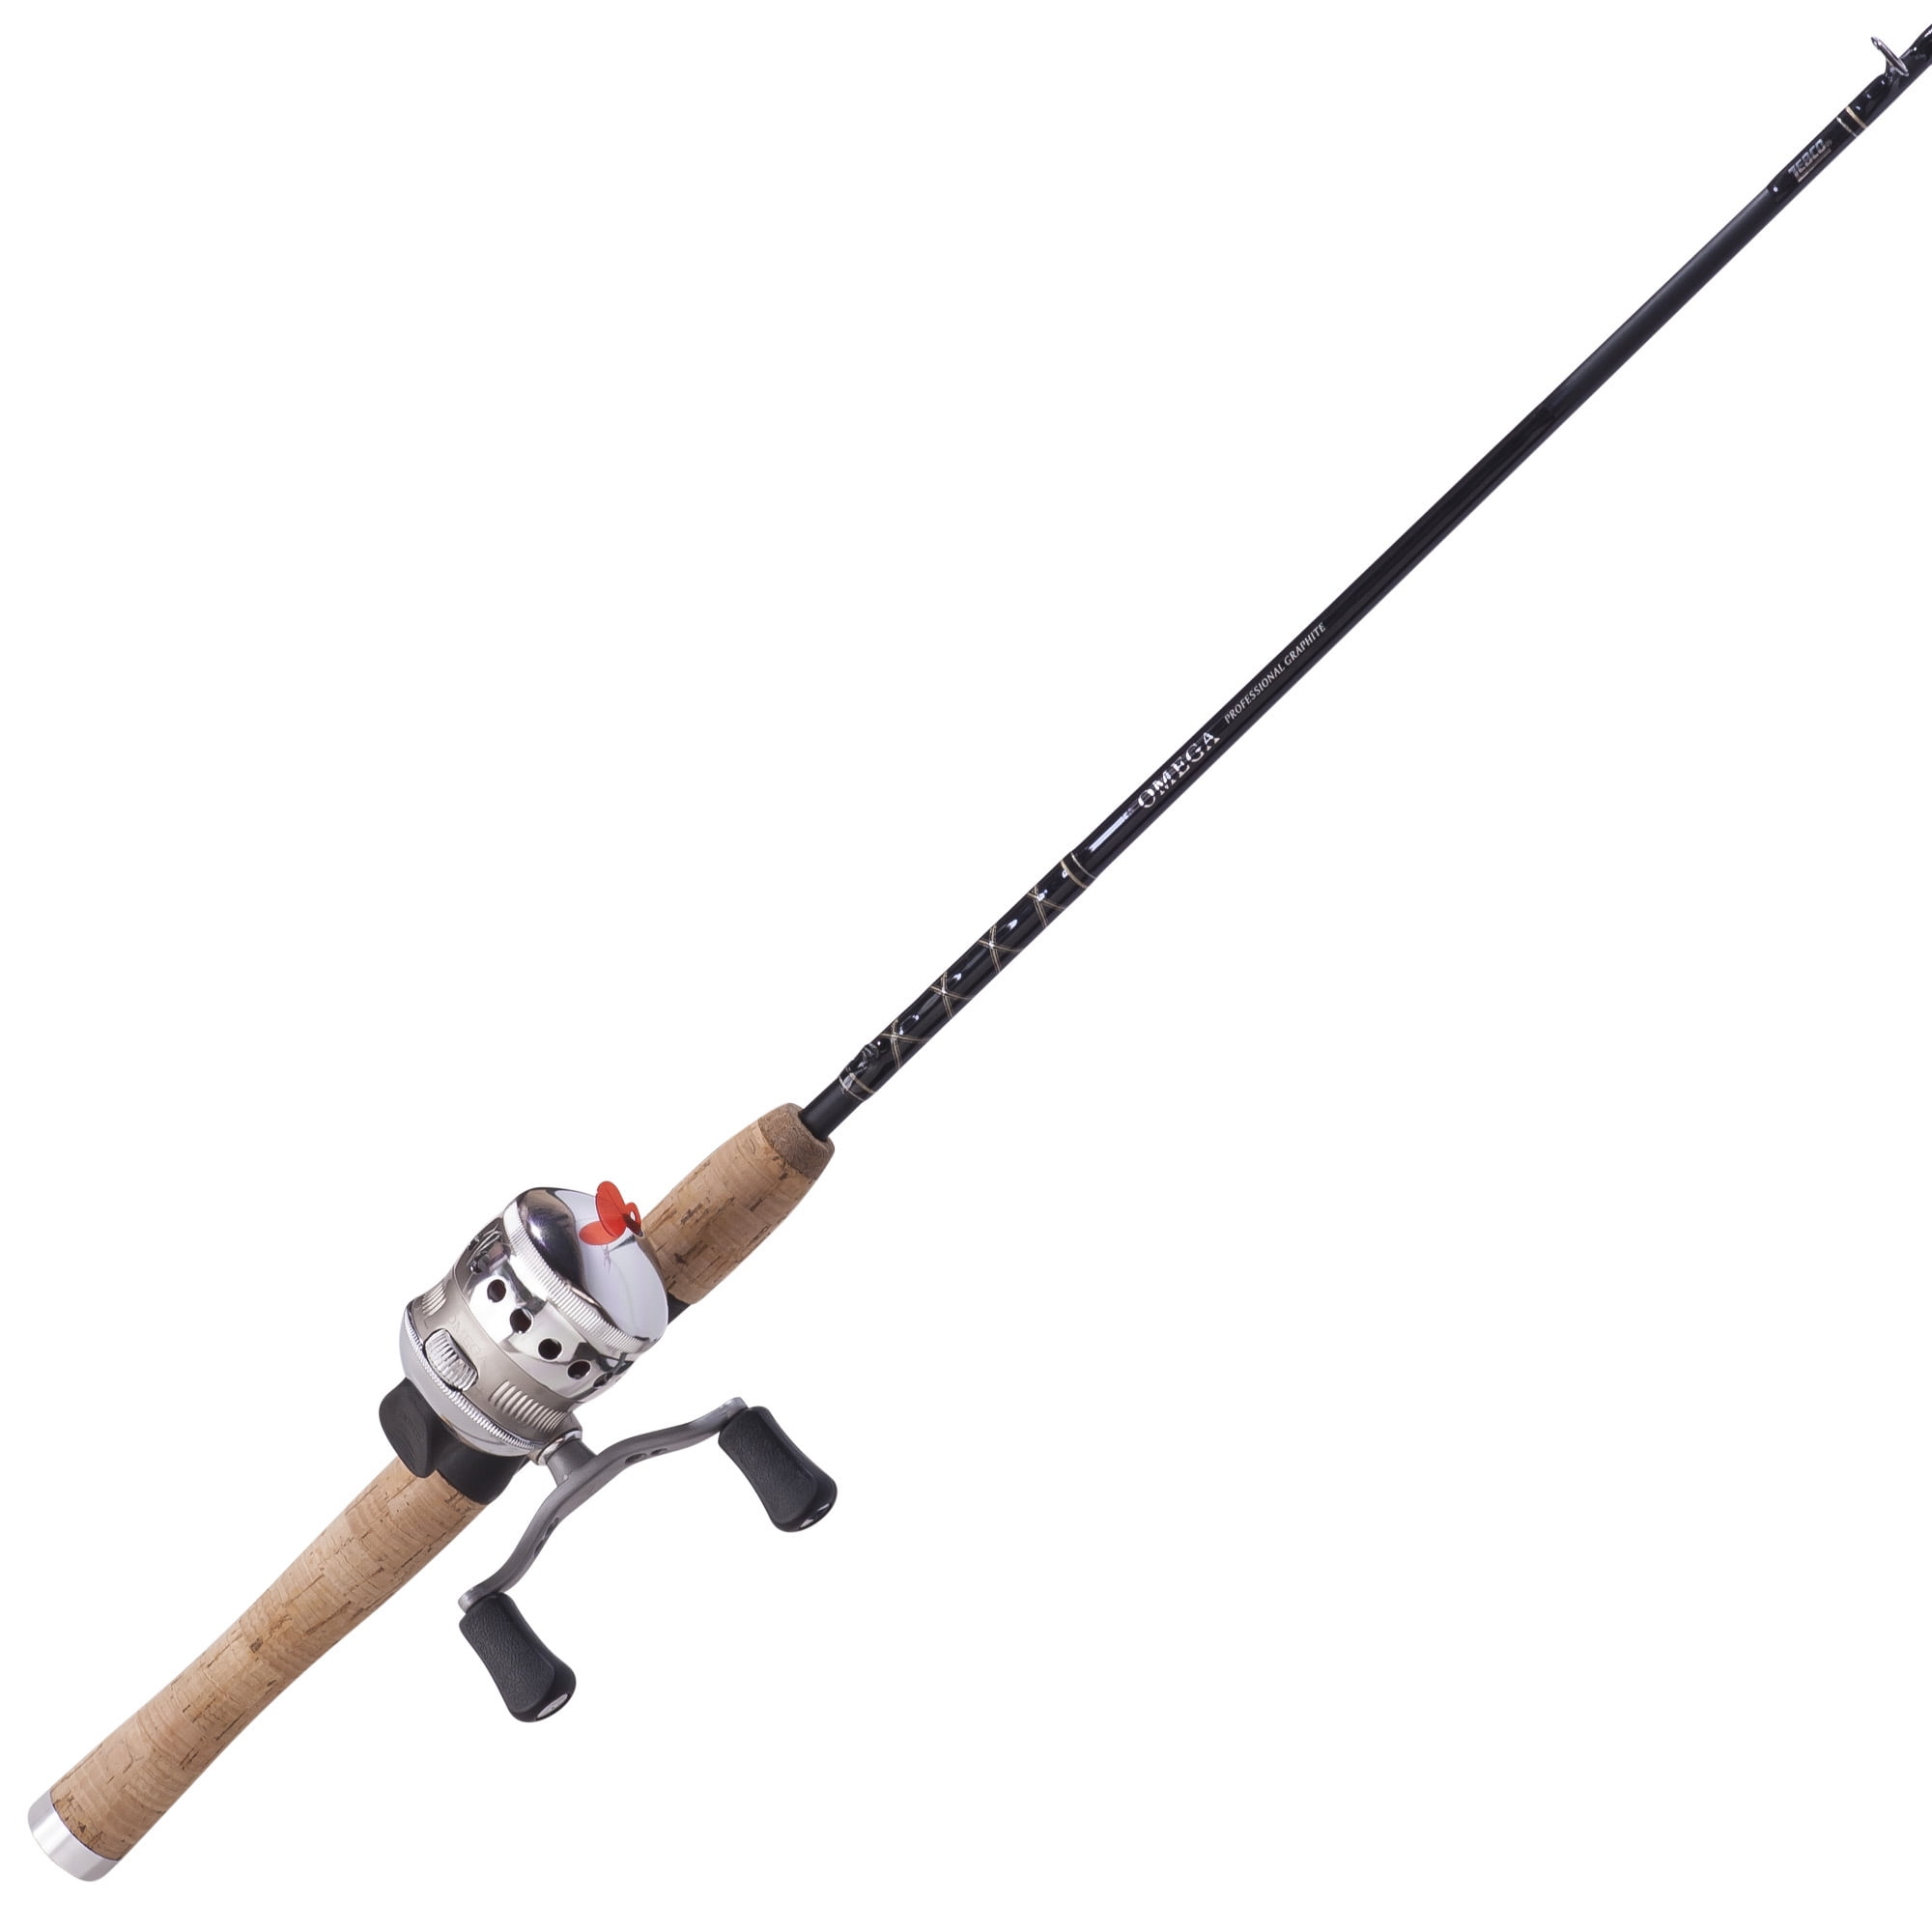 Zebco Omega Spincast Reel and Fishing Rod Combo, 6-Foot 1-Piece IM6  Graphite Fishing Pole, Natural Cork Rod Handle, Size 30 Reel, Pre-spooled  with